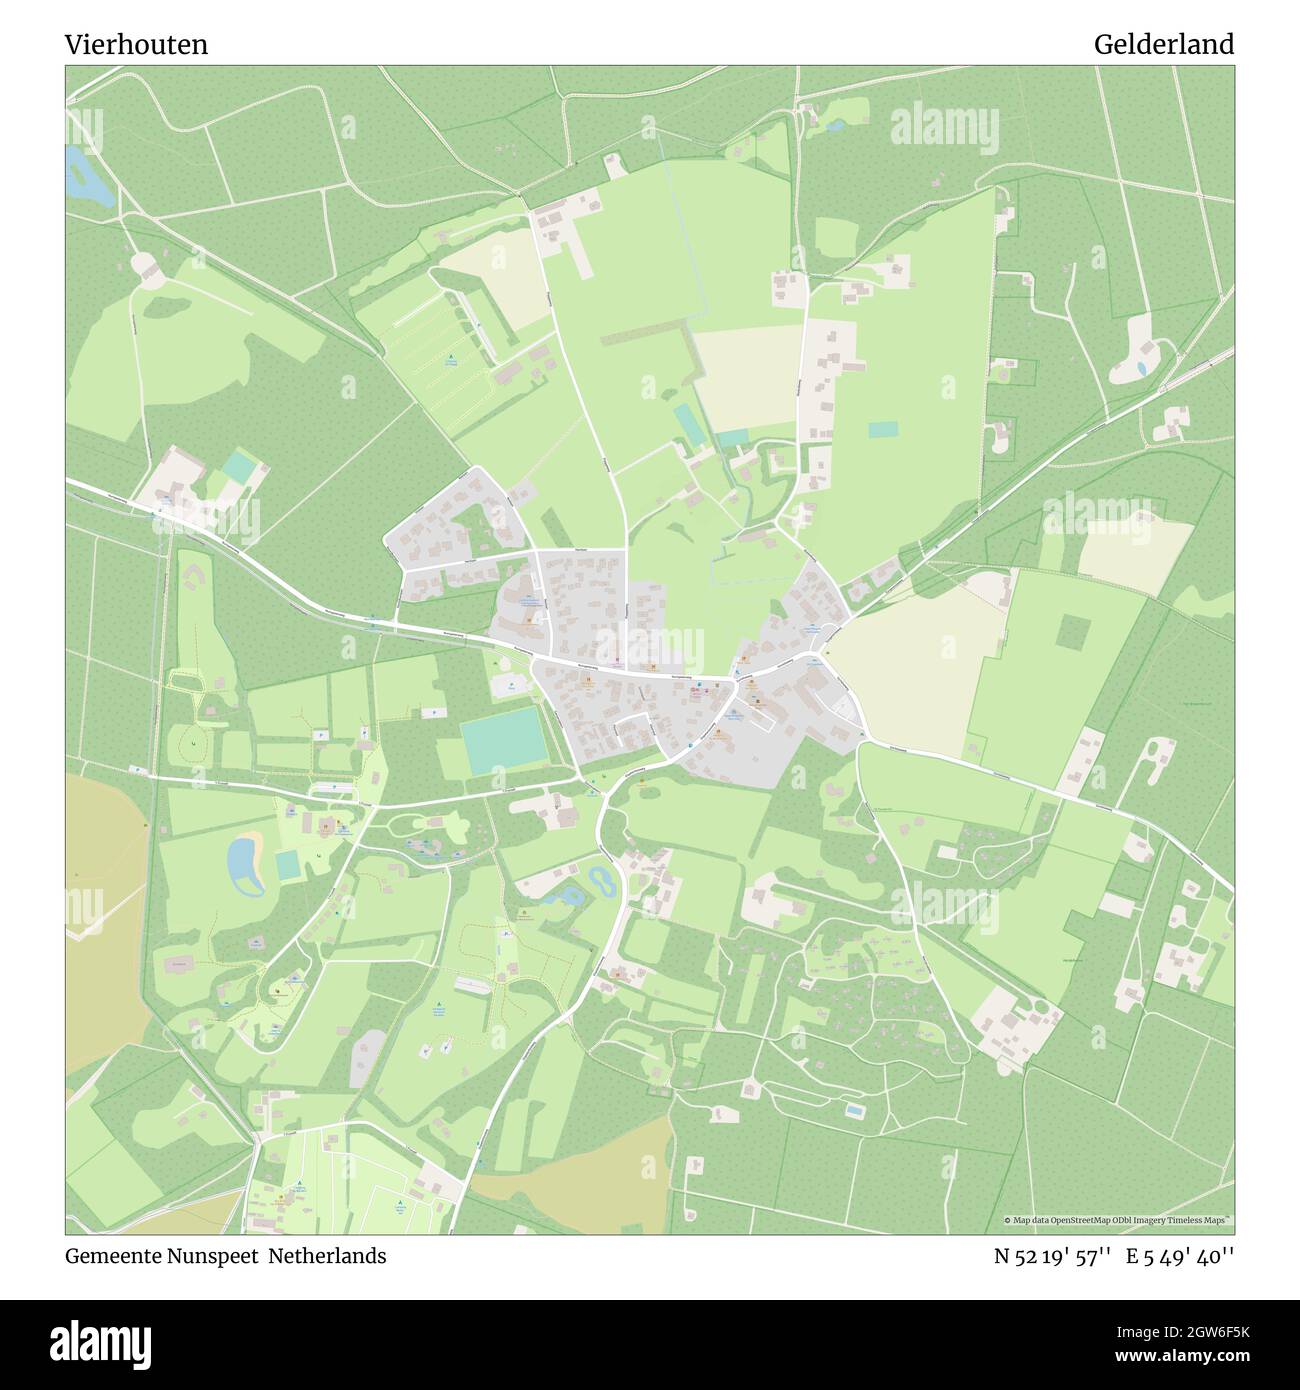 Vierhouten, Gemeente Nunspeet, Netherlands, Gelderland, N 52 19' 57'', E 5 49' 40'', map, Timeless Map published in 2021. Travelers, explorers and adventurers like Florence Nightingale, David Livingstone, Ernest Shackleton, Lewis and Clark and Sherlock Holmes relied on maps to plan travels to the world's most remote corners, Timeless Maps is mapping most locations on the globe, showing the achievement of great dreams Stock Photo